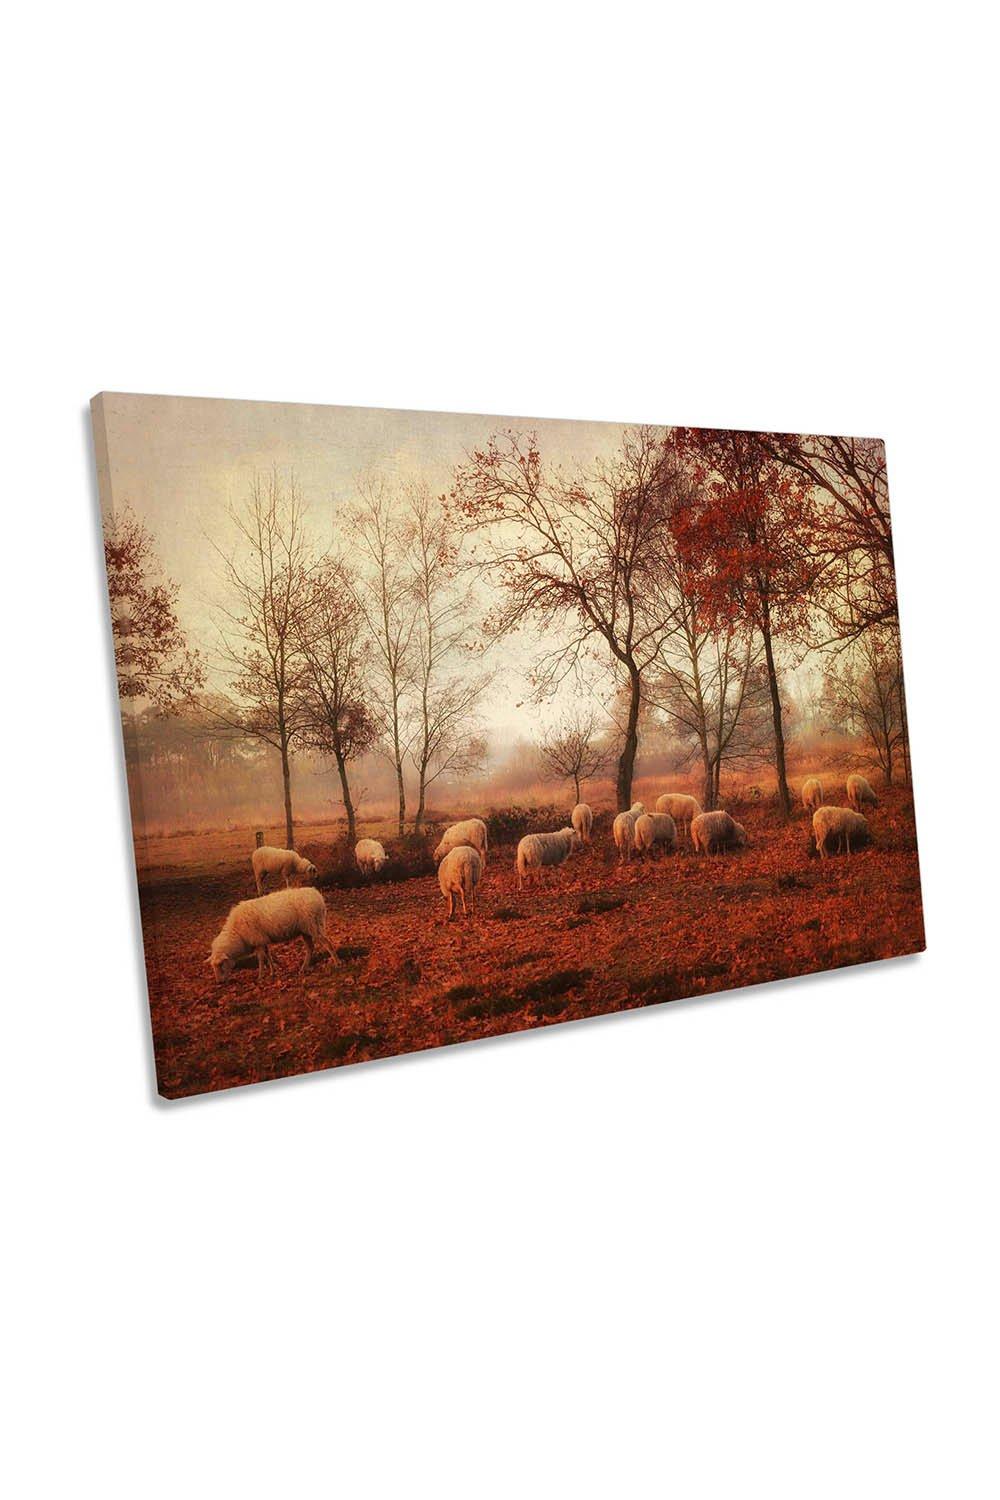 Last Days of Autumn Sheep Canvas Wall Art Picture Print